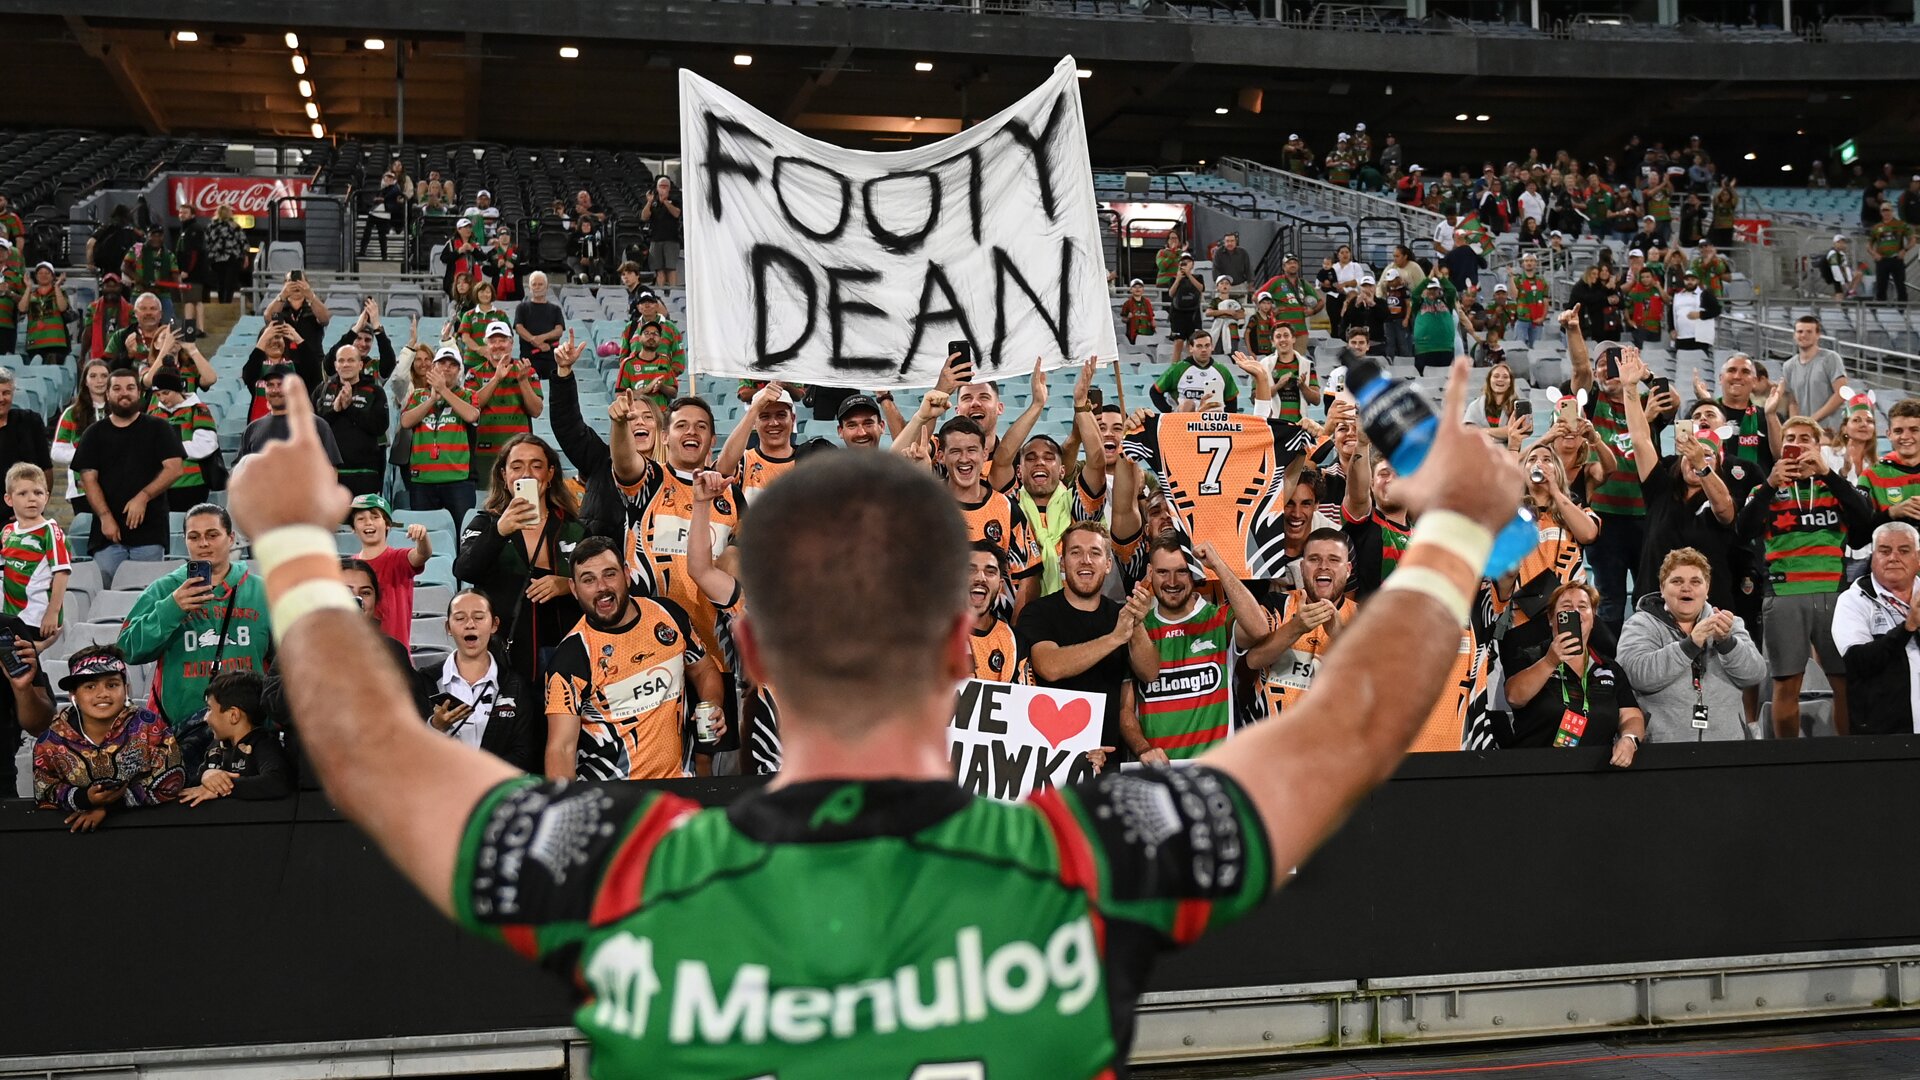 Behind the Jersey with Footy Dean